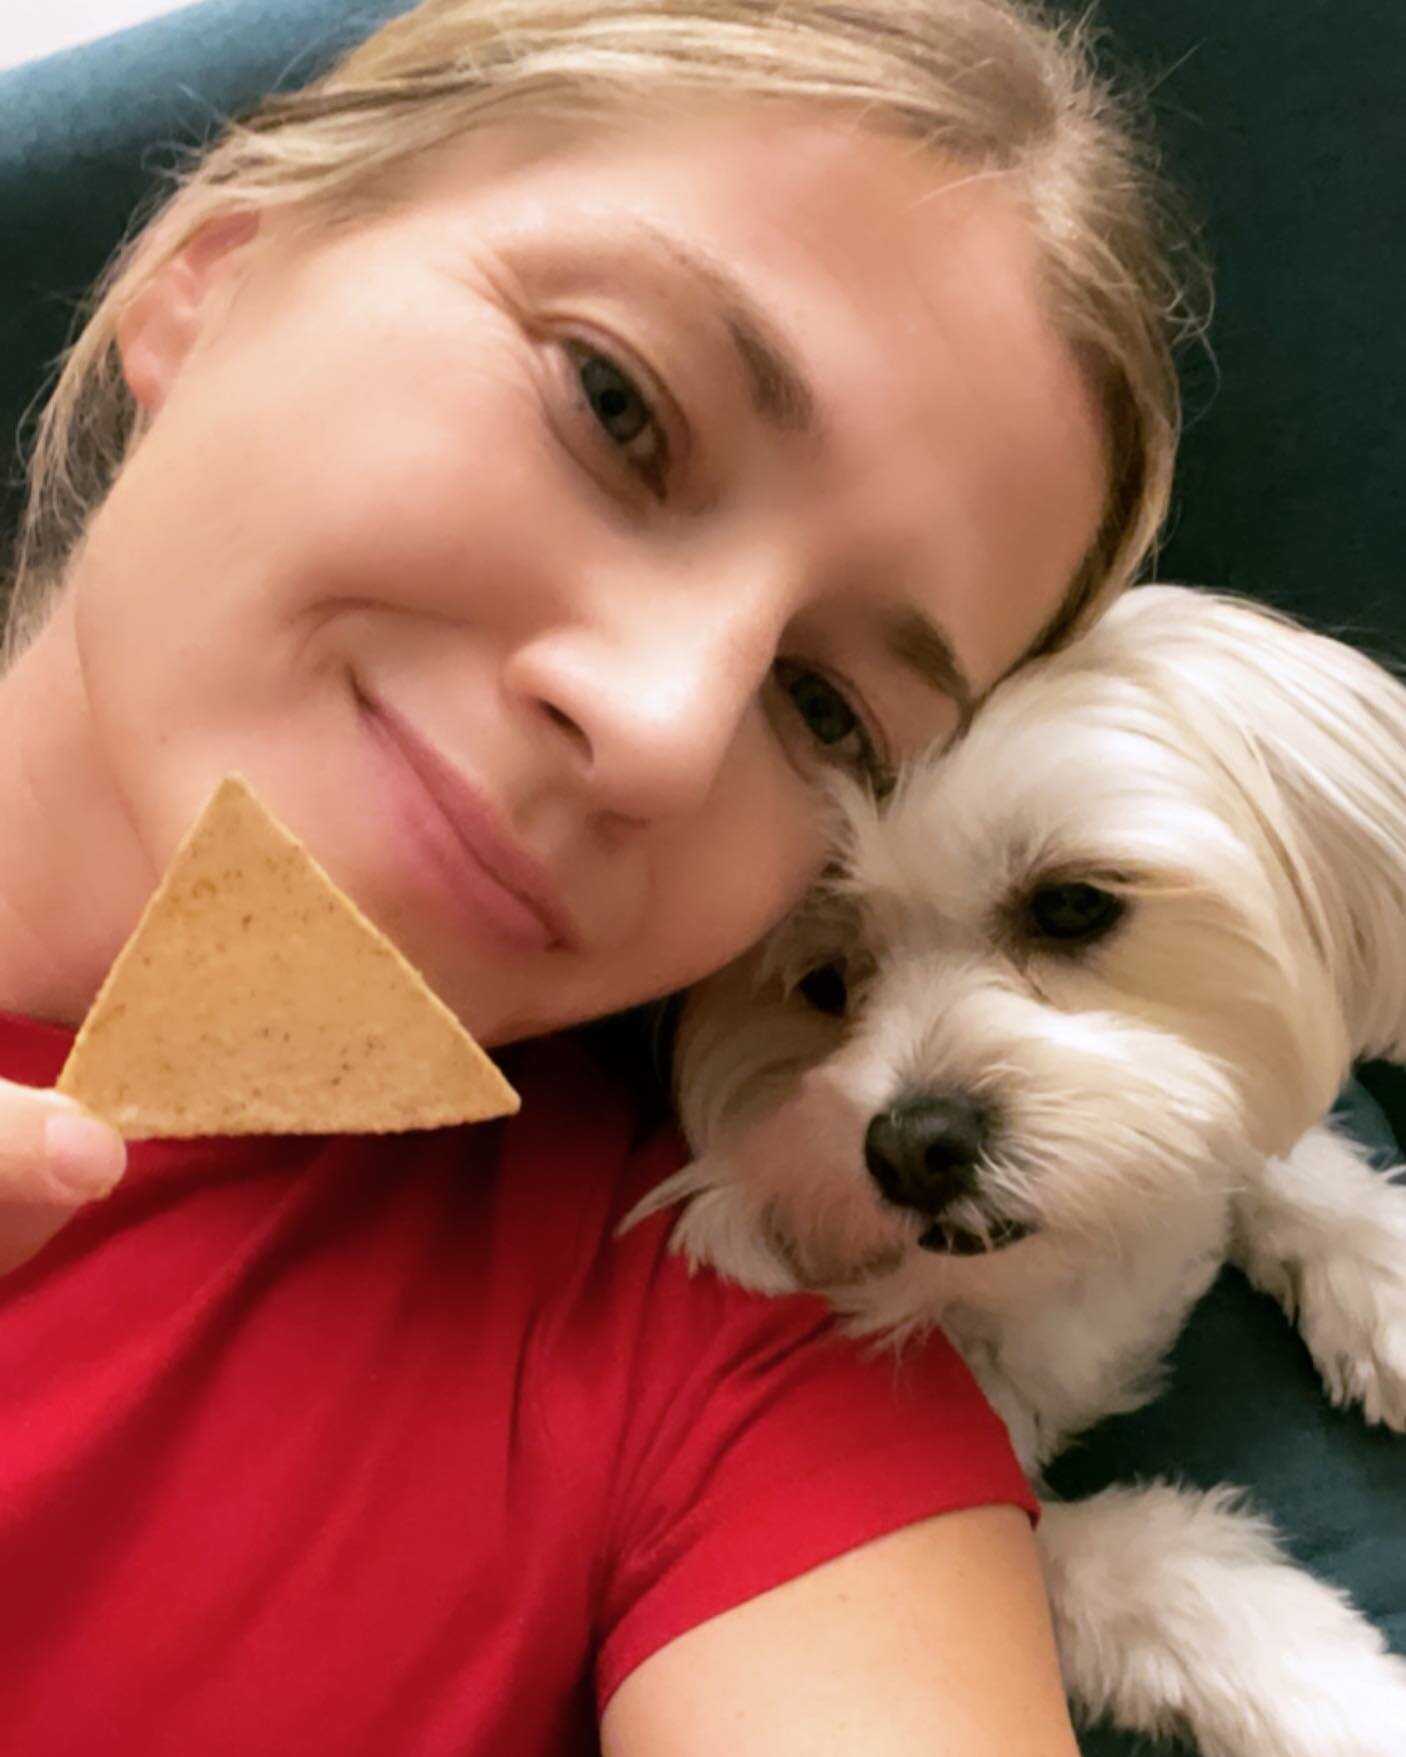 Honey and I had some snacks last night after dinner. PSA, it&rsquo;s OK to sometimes snack even if you set a goal not to eat after dinner, IMO. And in my opinion, it&rsquo;s great to have discipline but it&rsquo;s even greater to have self compassion